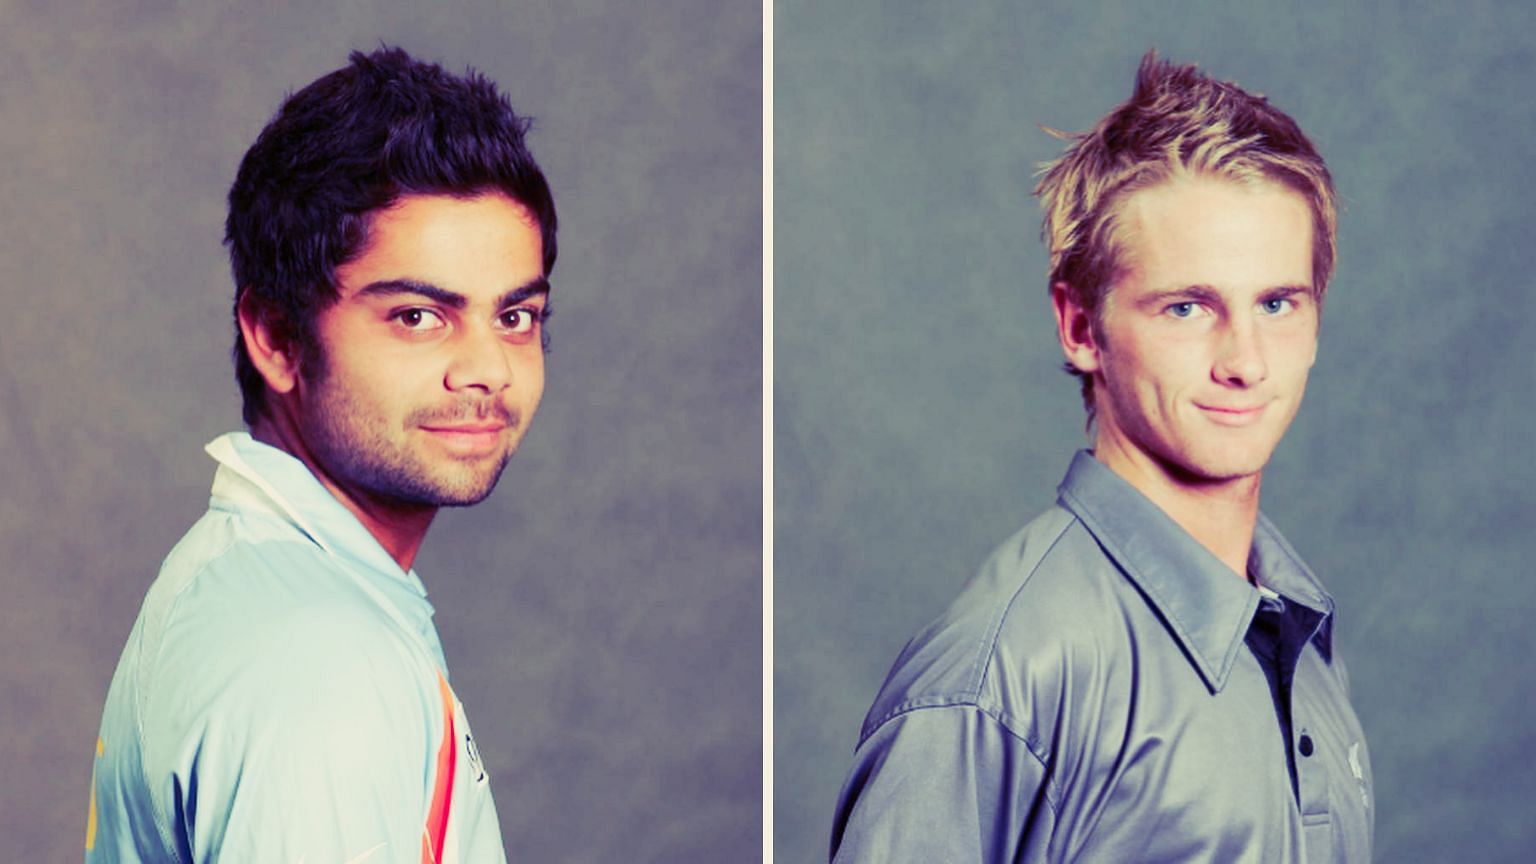 Photos of 18-year-old Kohli and Williamson, prior to the U-19 World Cup semi-final in 2008, were released by the ICC.